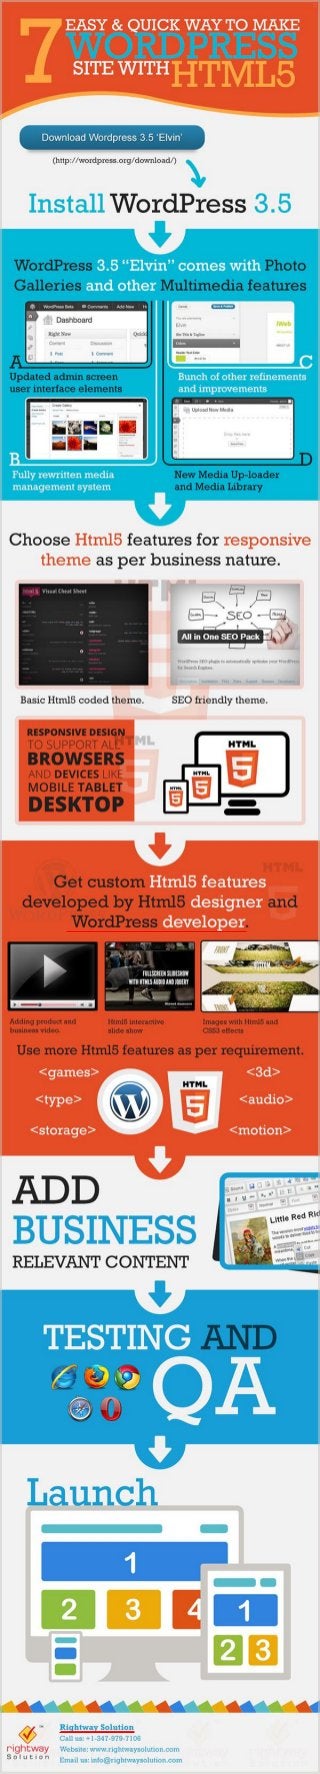 steps To make WordPress website With HTML5